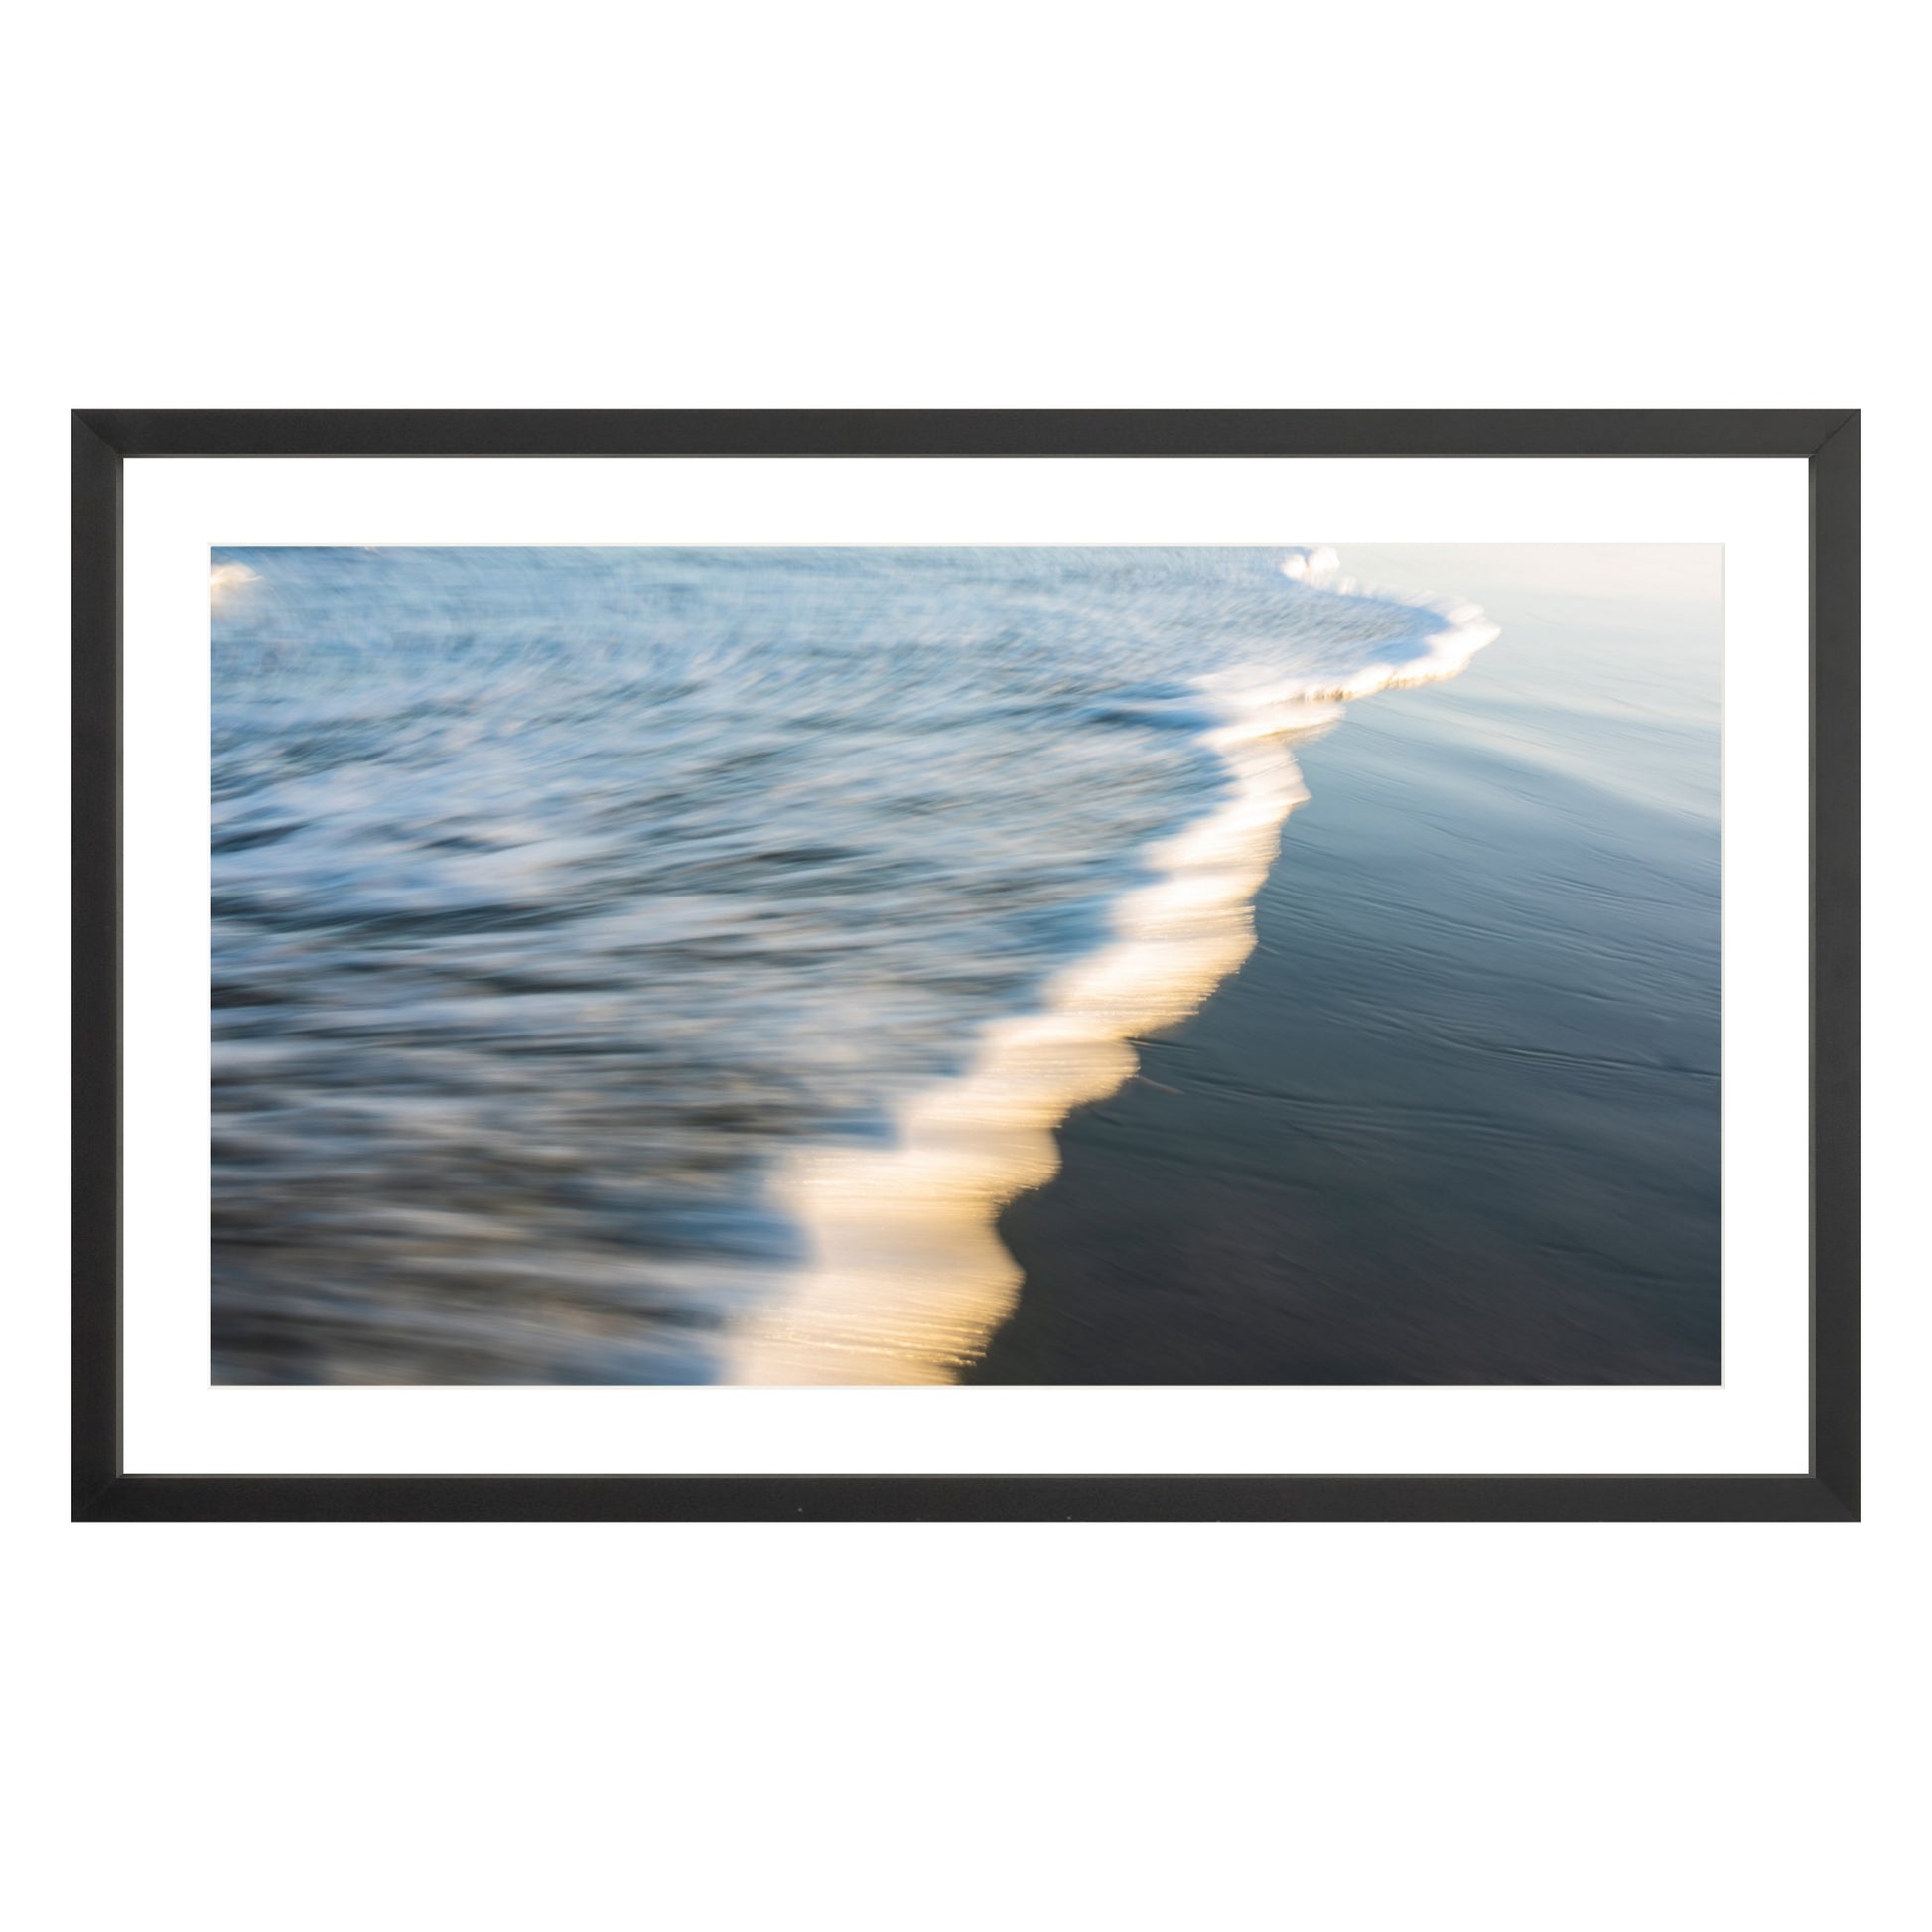 Photograph of wave at Atlantic Ocean framed in black with white mat